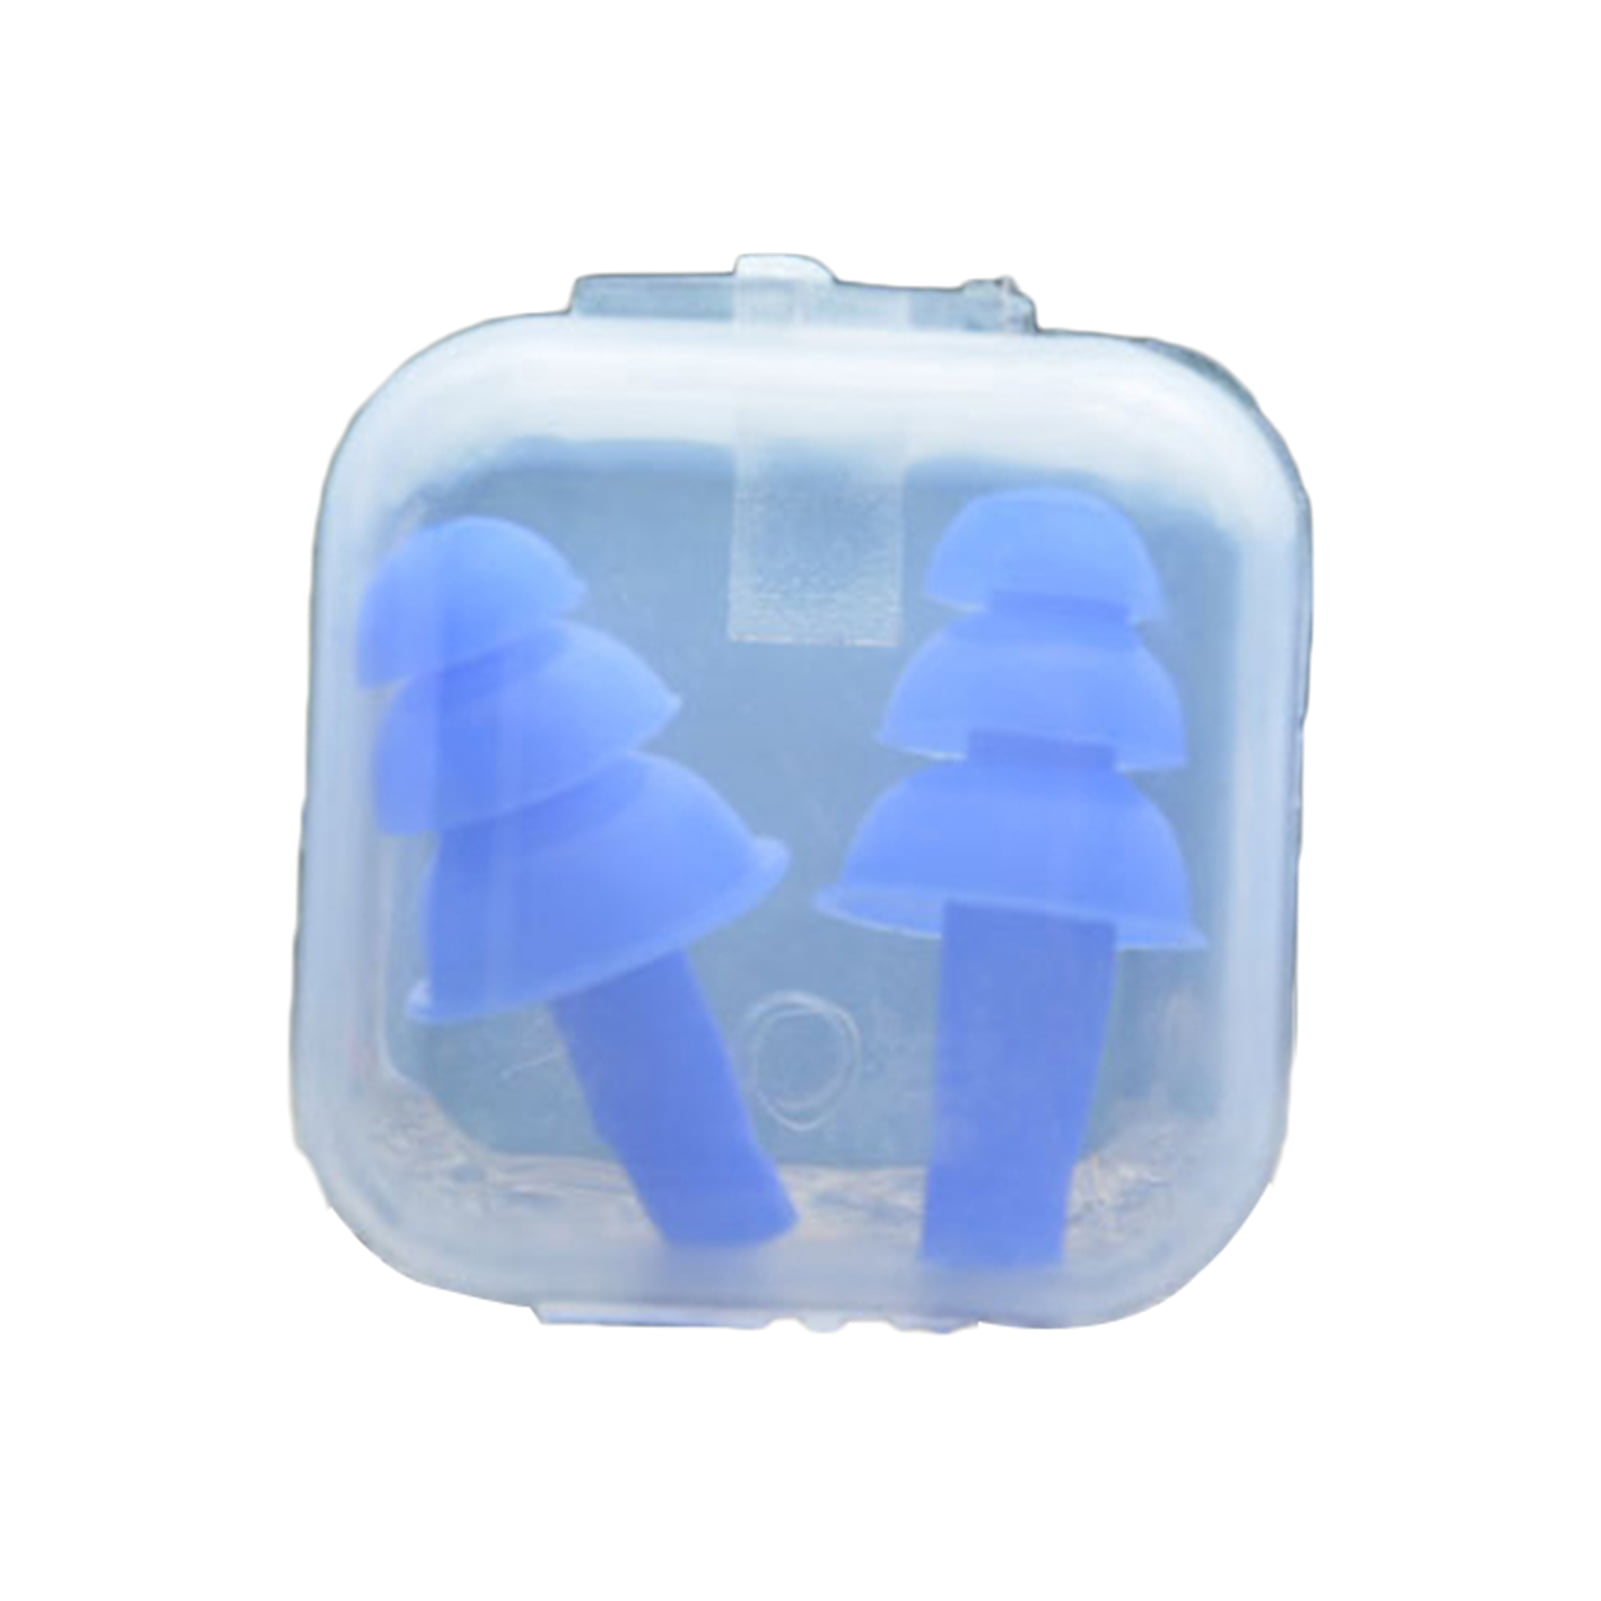 uxcell Pair Black Silicone Earplug Earphone for Swiming Training